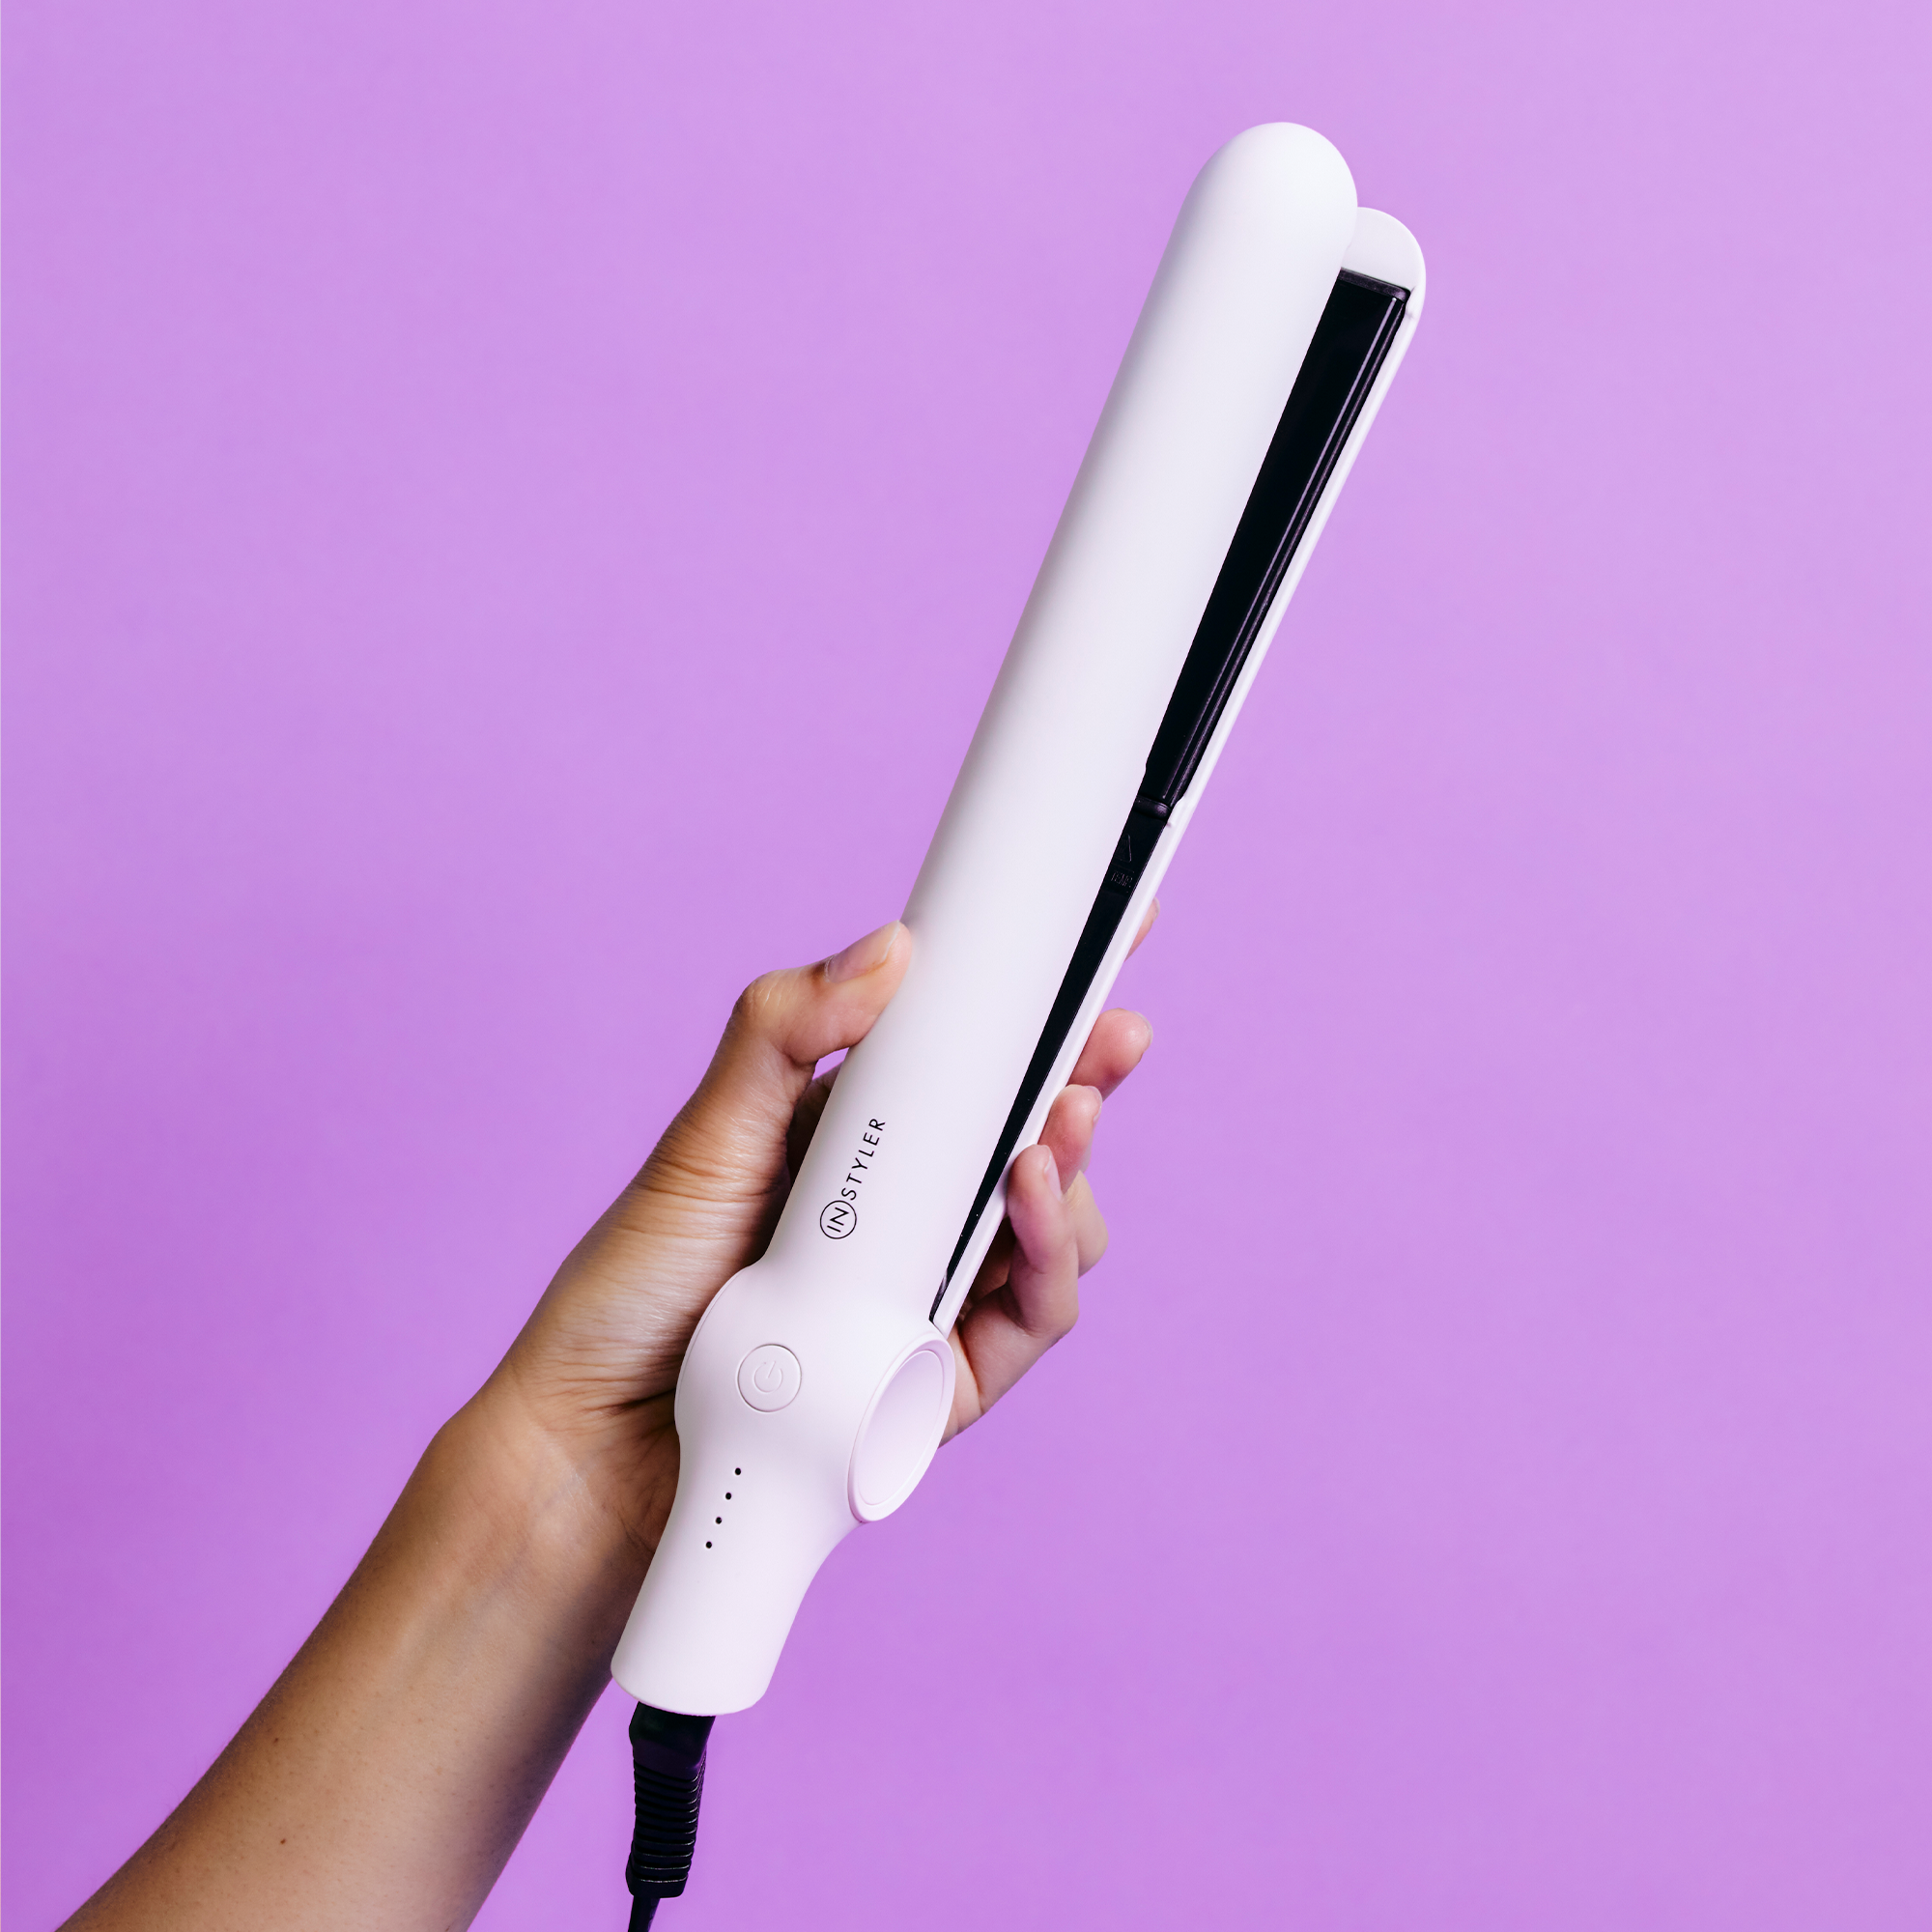 Curation 1" Styling Iron by InStyler